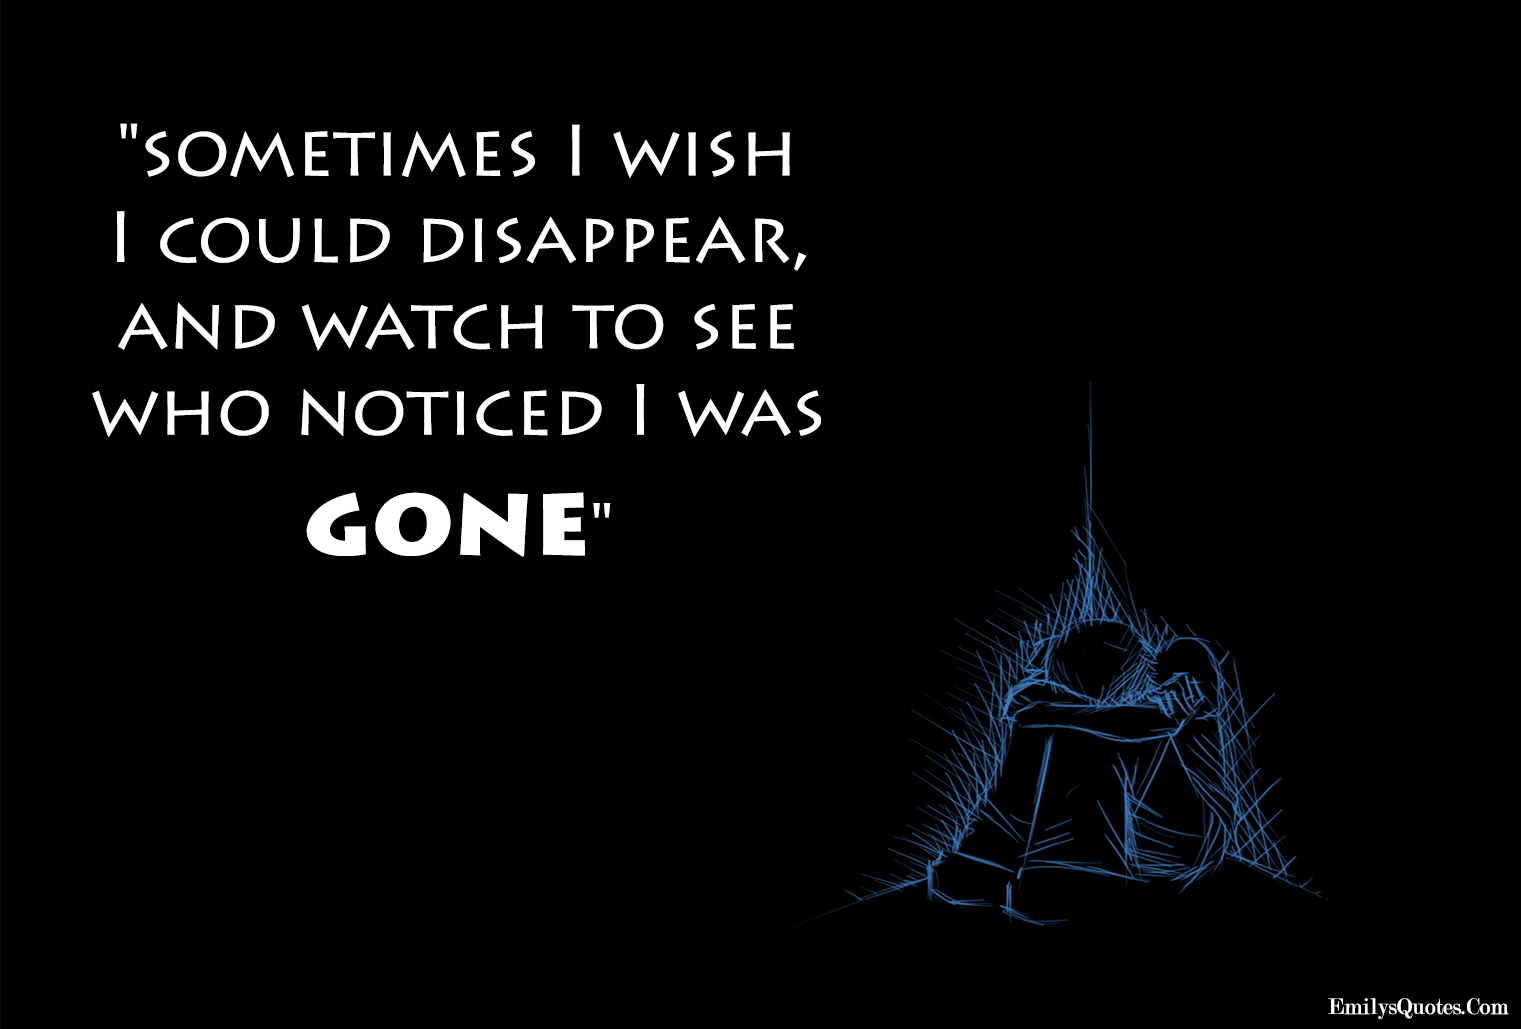 Sometimes I wish I could disappear, and watch to see who noticed I was gone